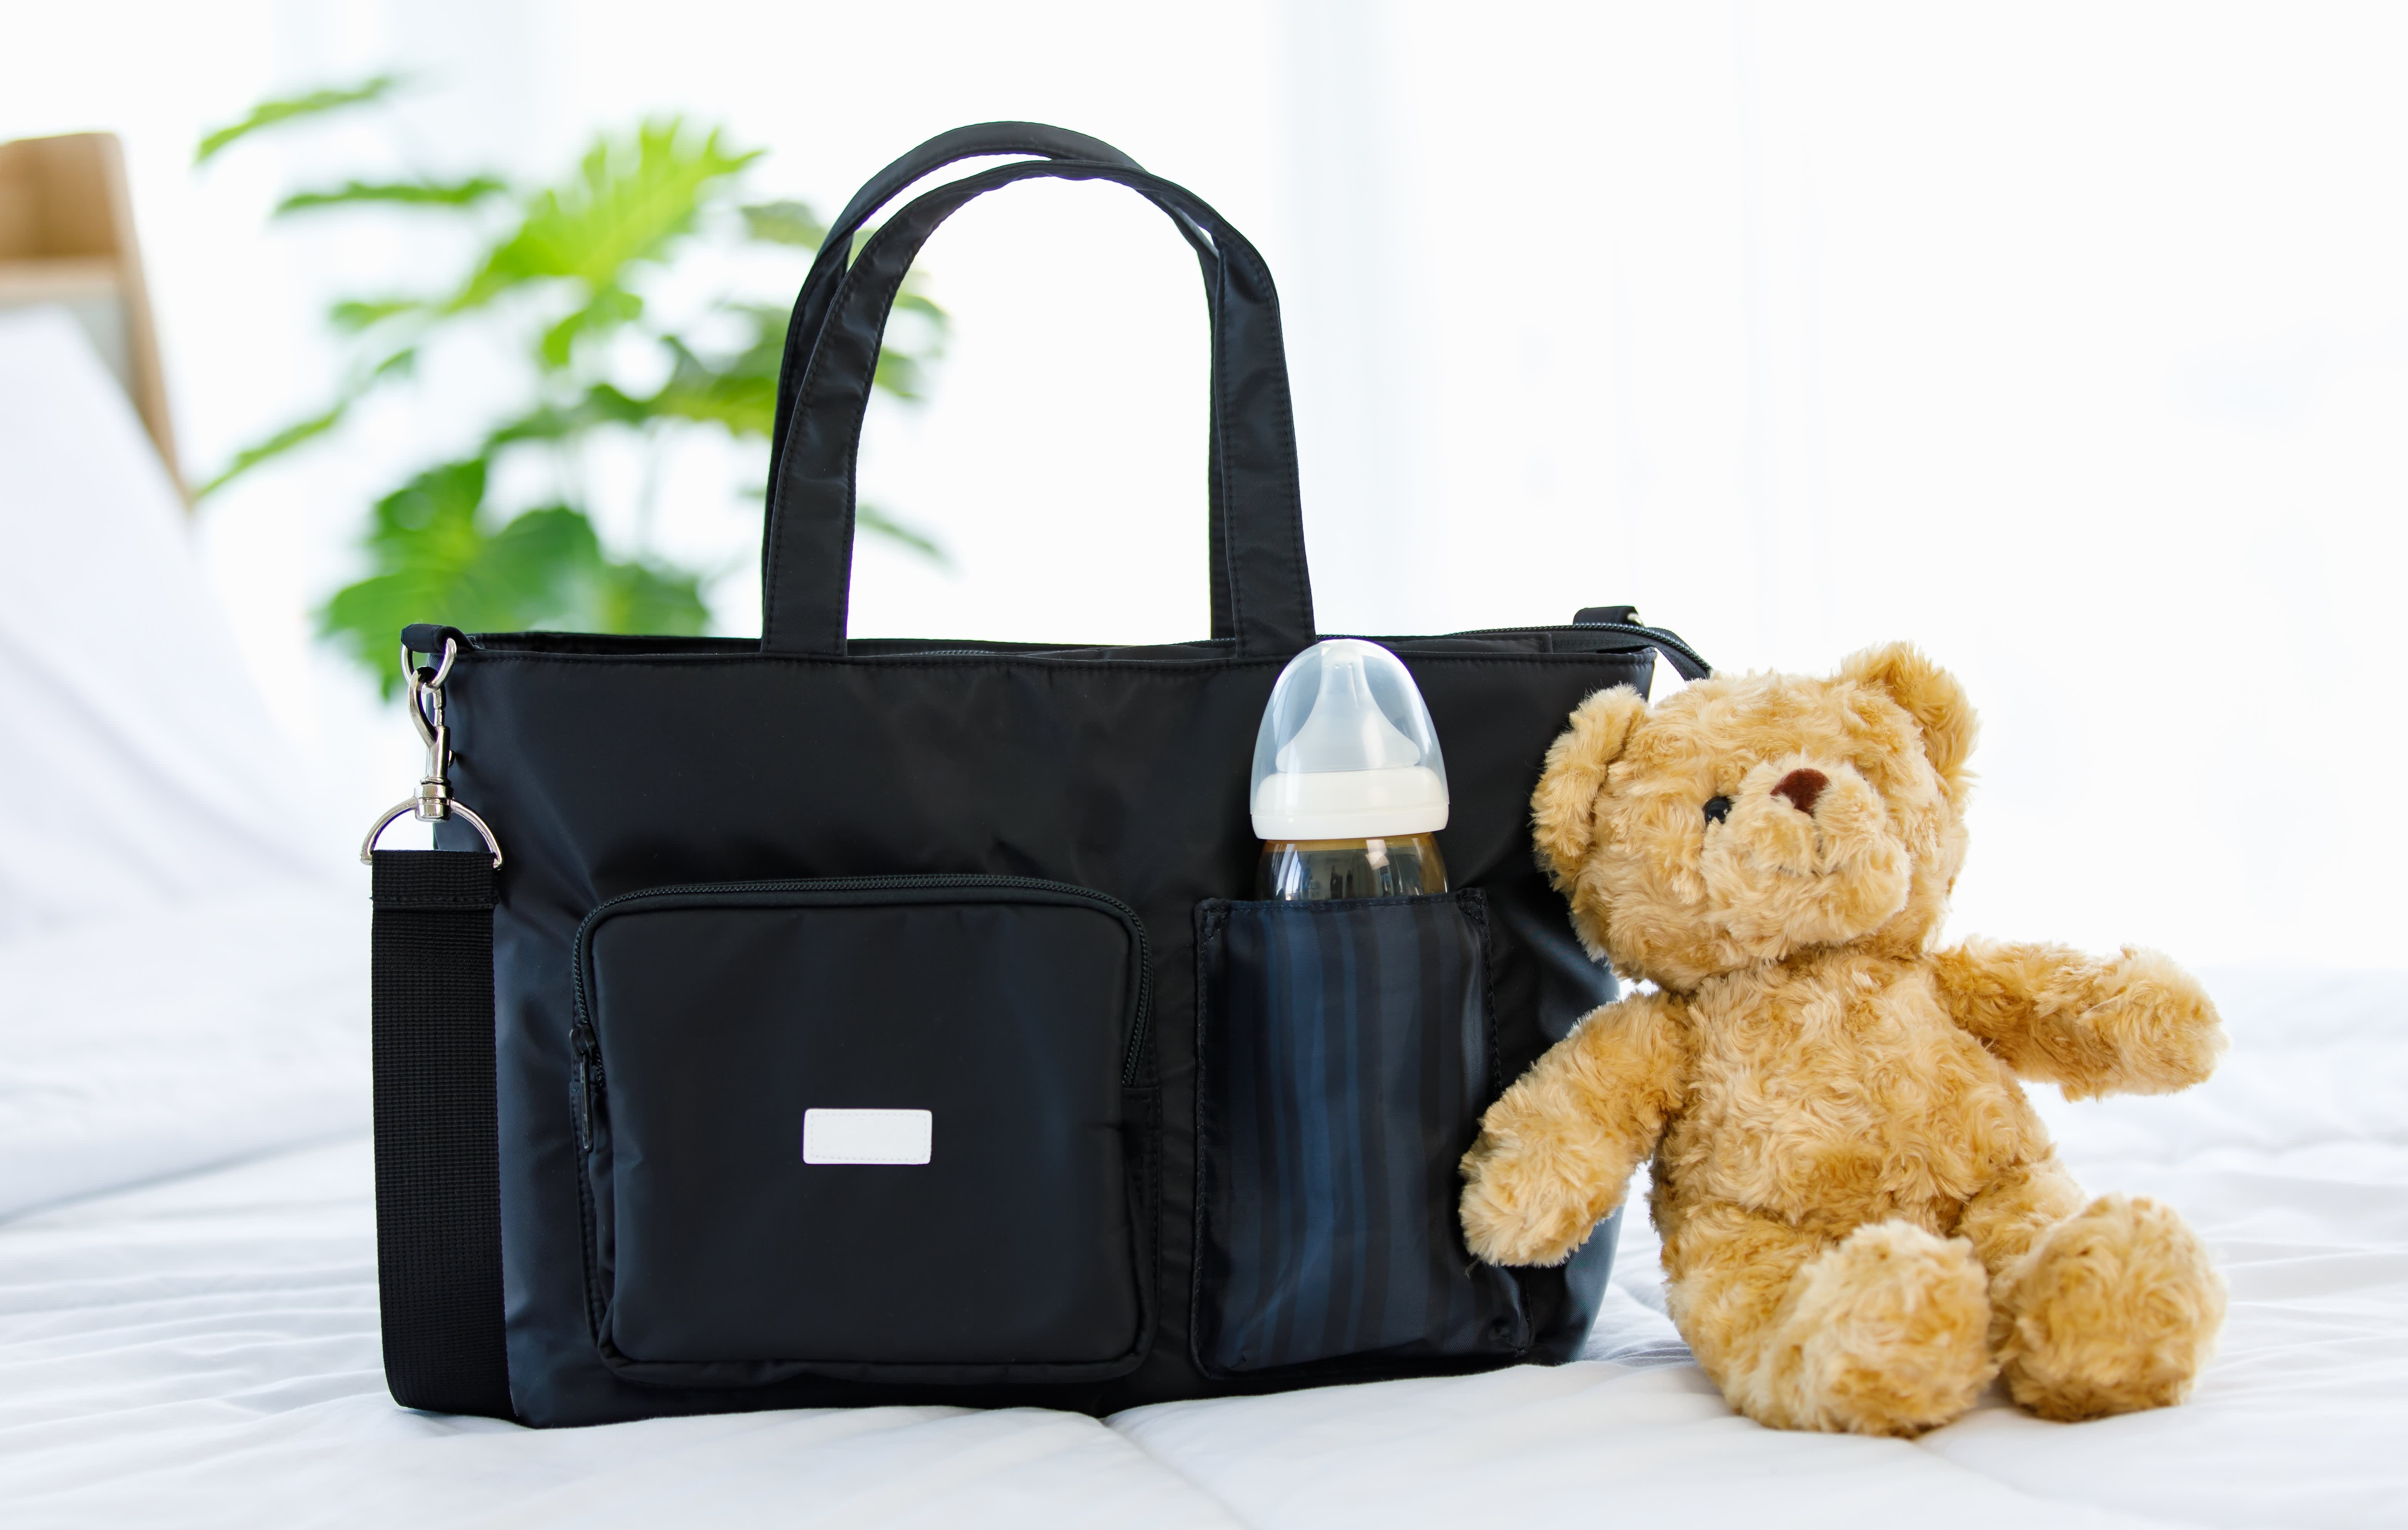 Organizing A Diaper Bag: What To Include & How To Organize It